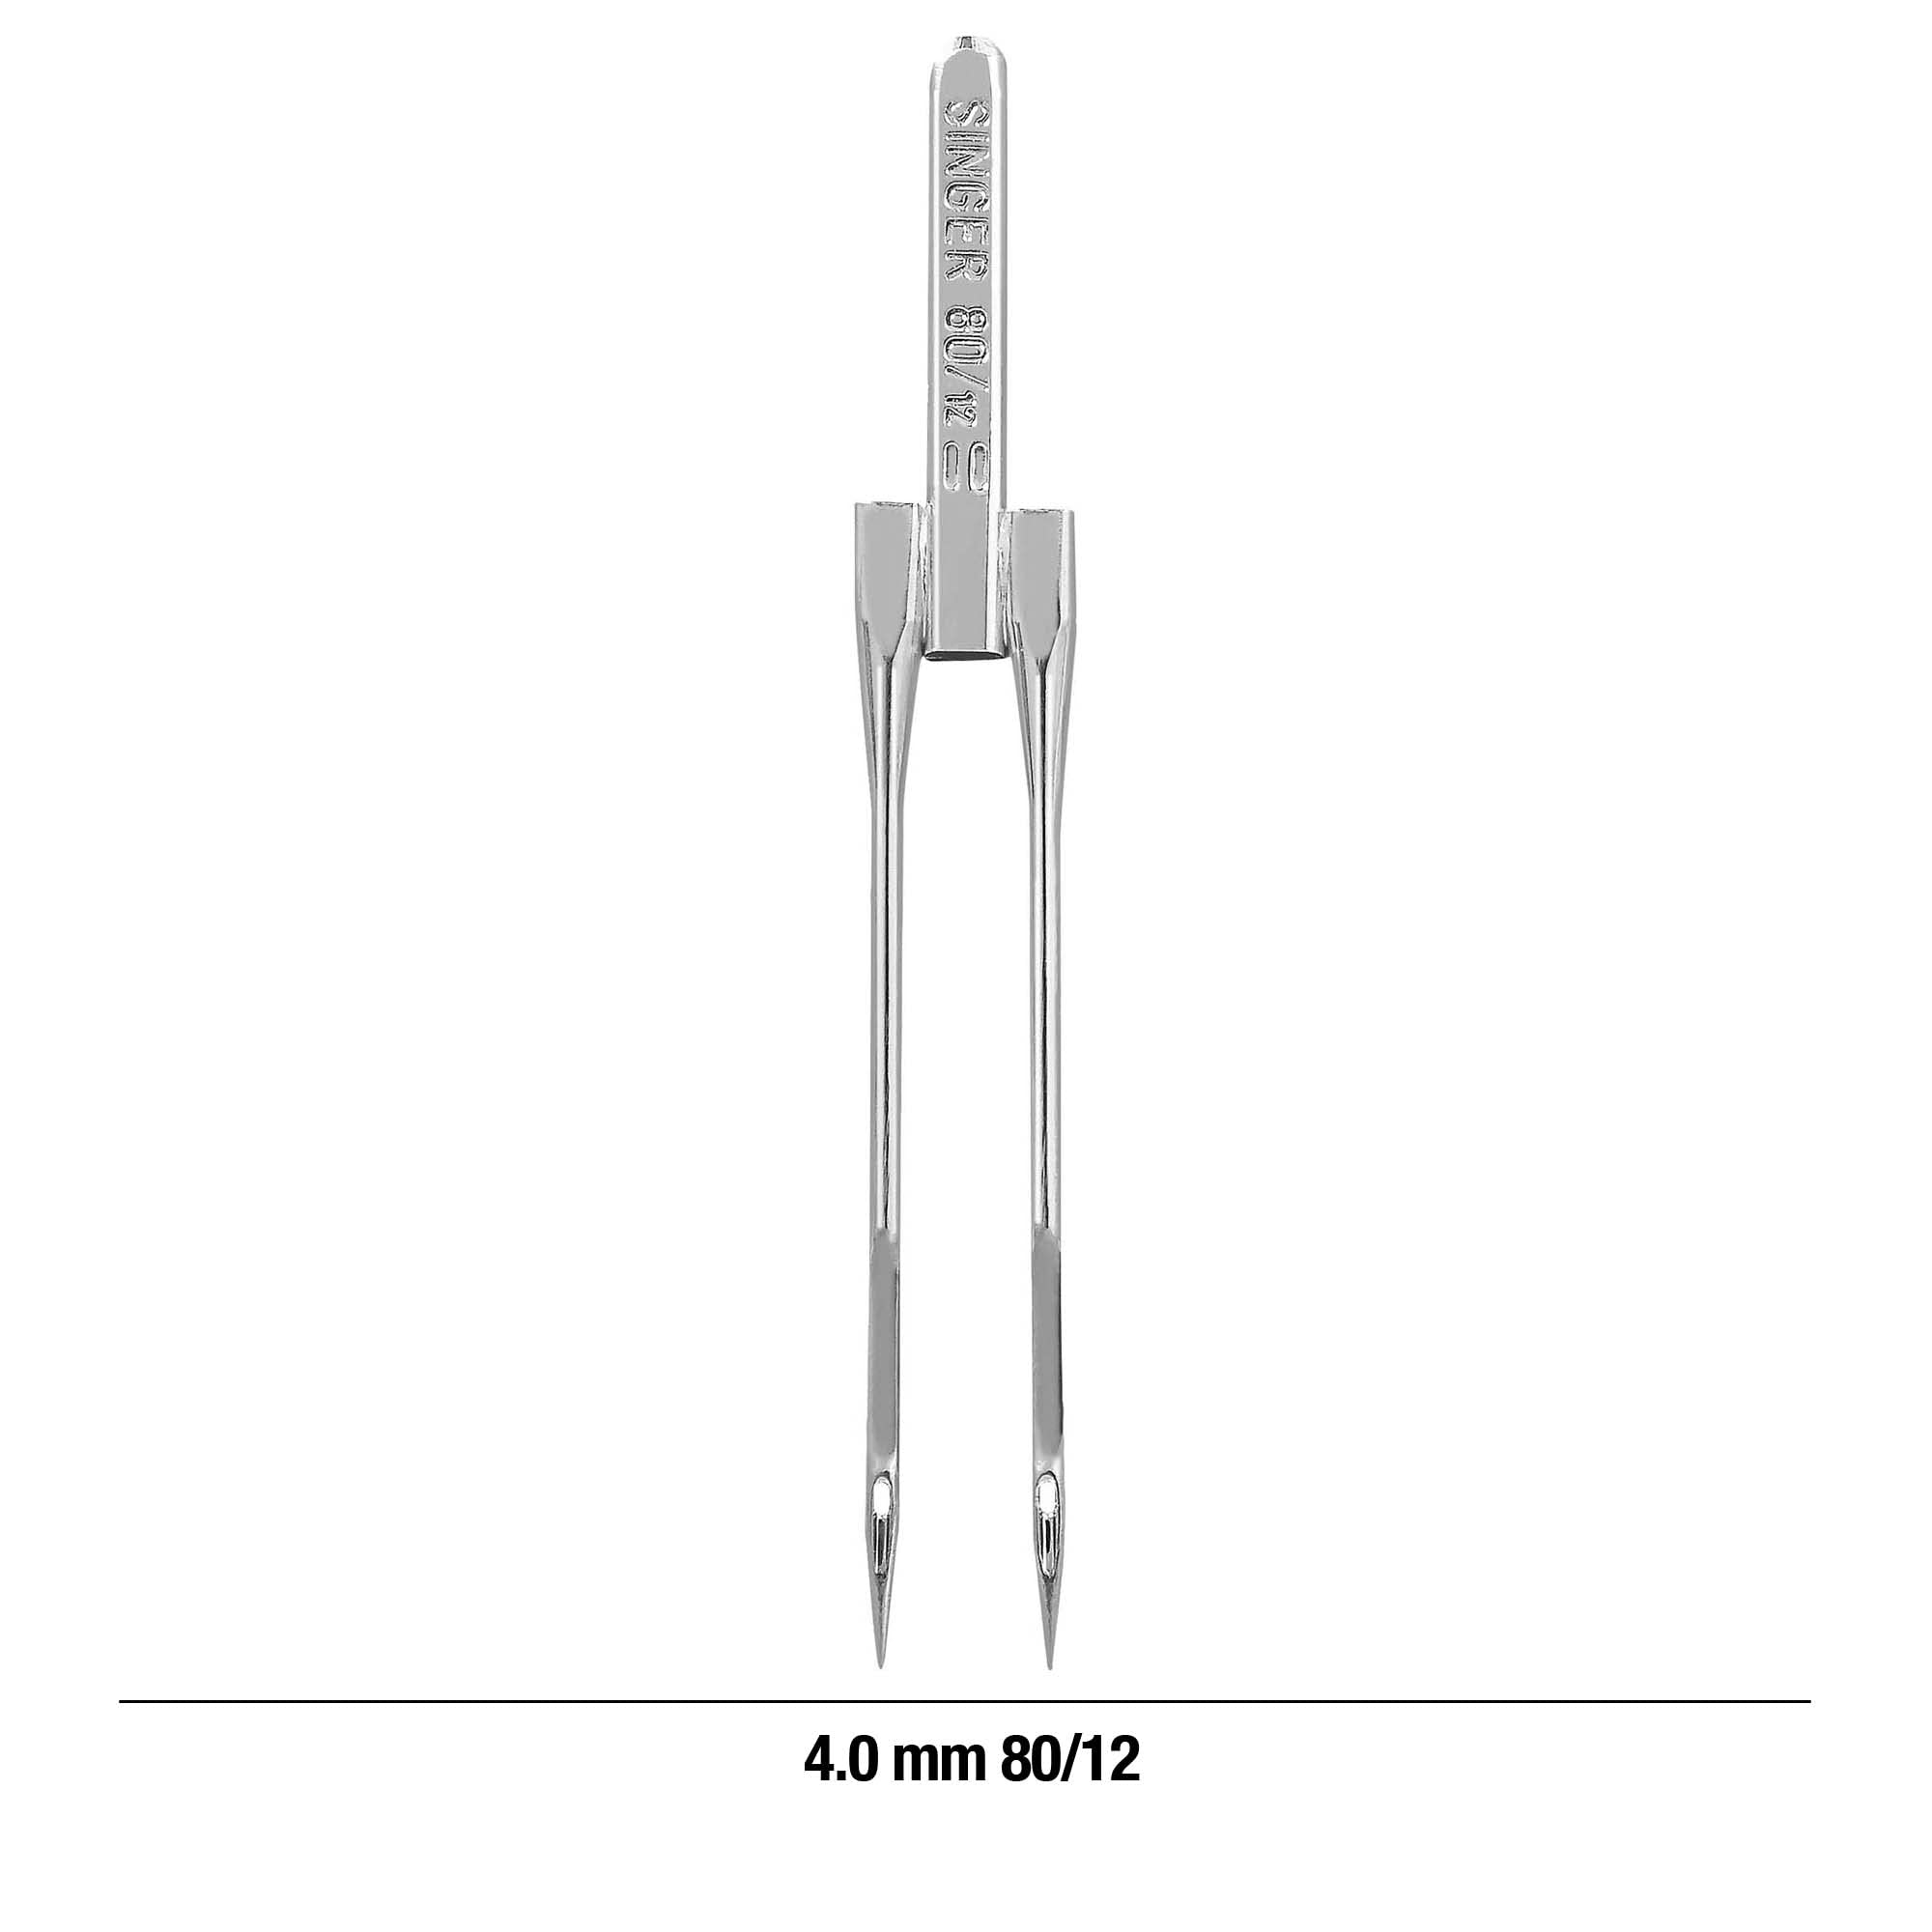 SINGER 04719 Universal Twin Stretch Sewing Machine Needle, 4.0mm